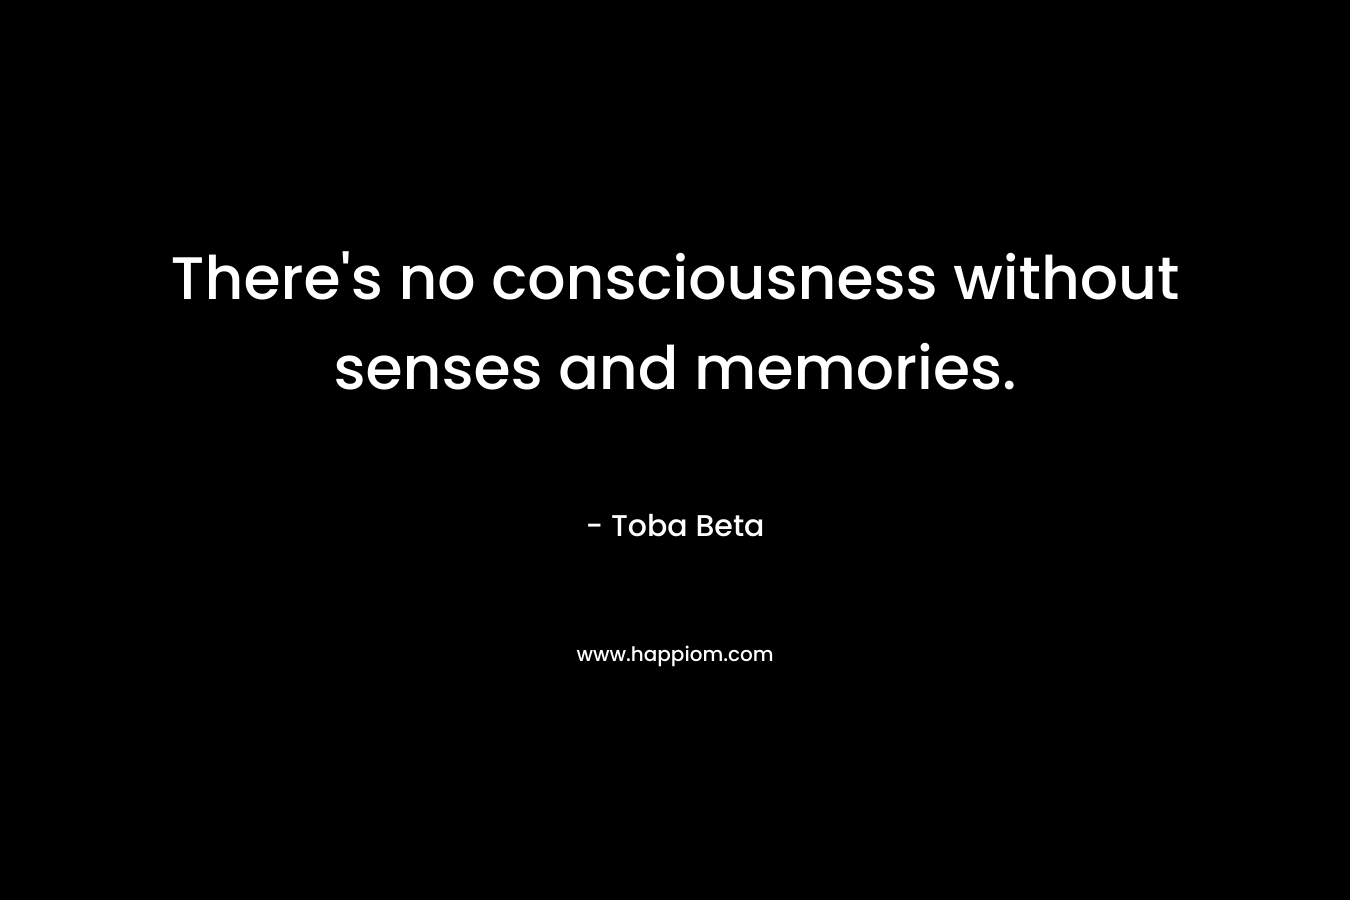 There's no consciousness without senses and memories.